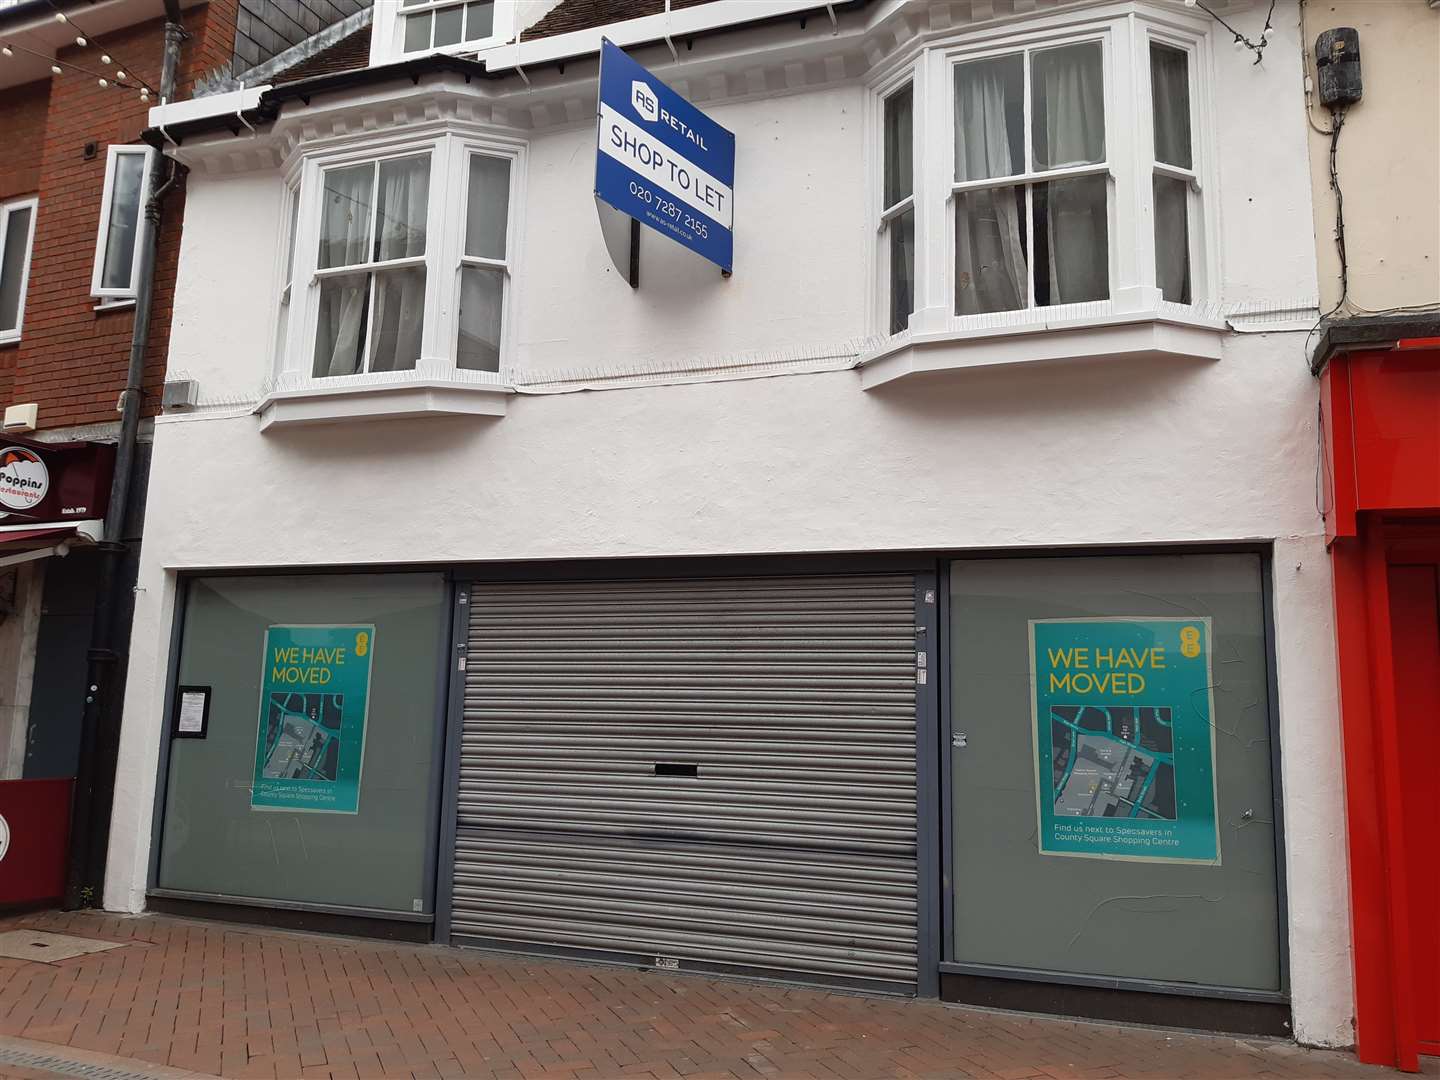 Subway wants to open in the former EE shop opposite the ex-M&S unit